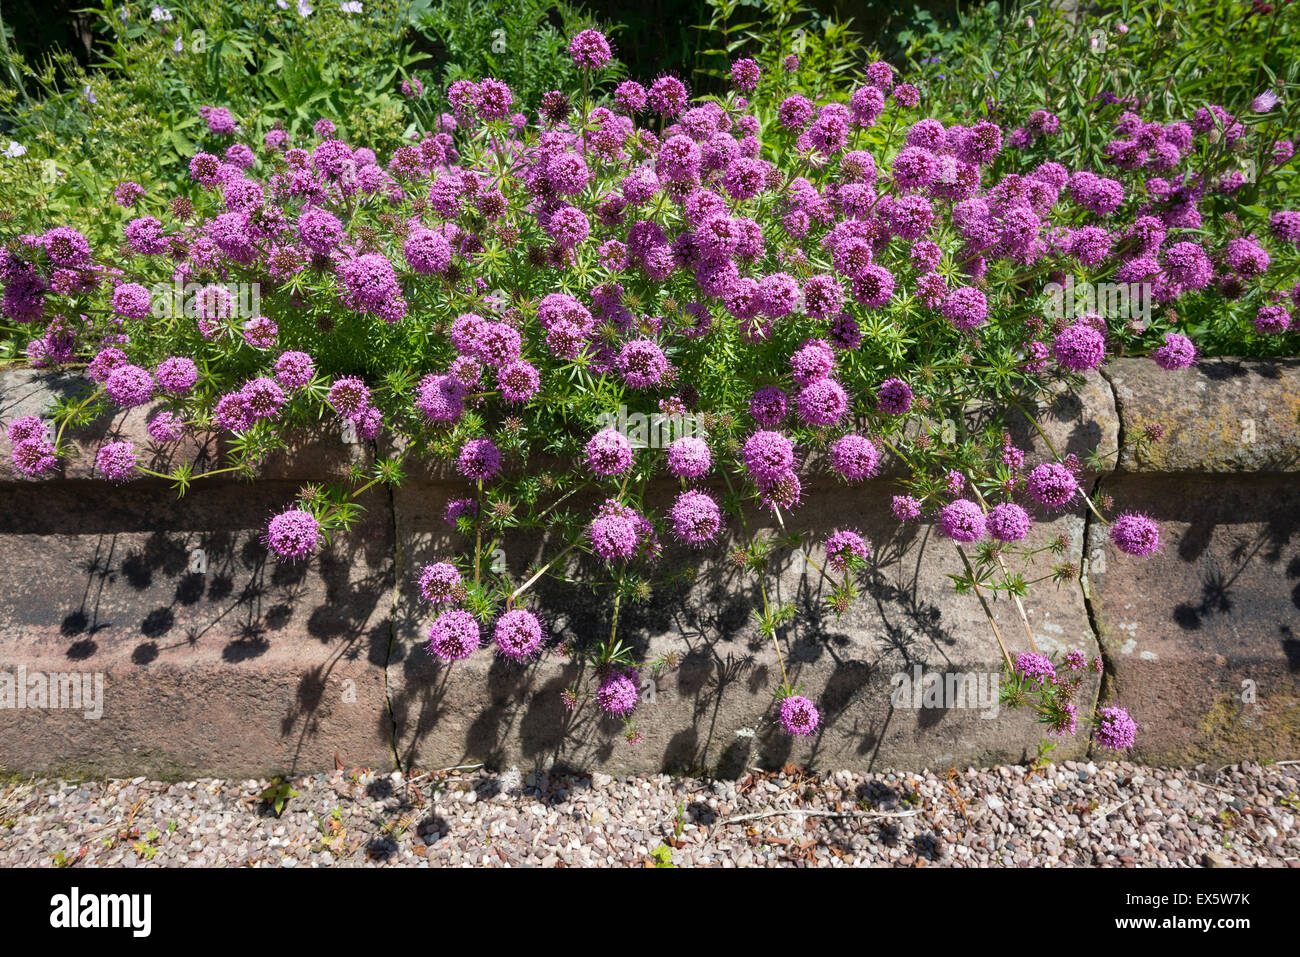 Phuopsis Stylosa growing over stone edging beside a garden path. Stock Photo